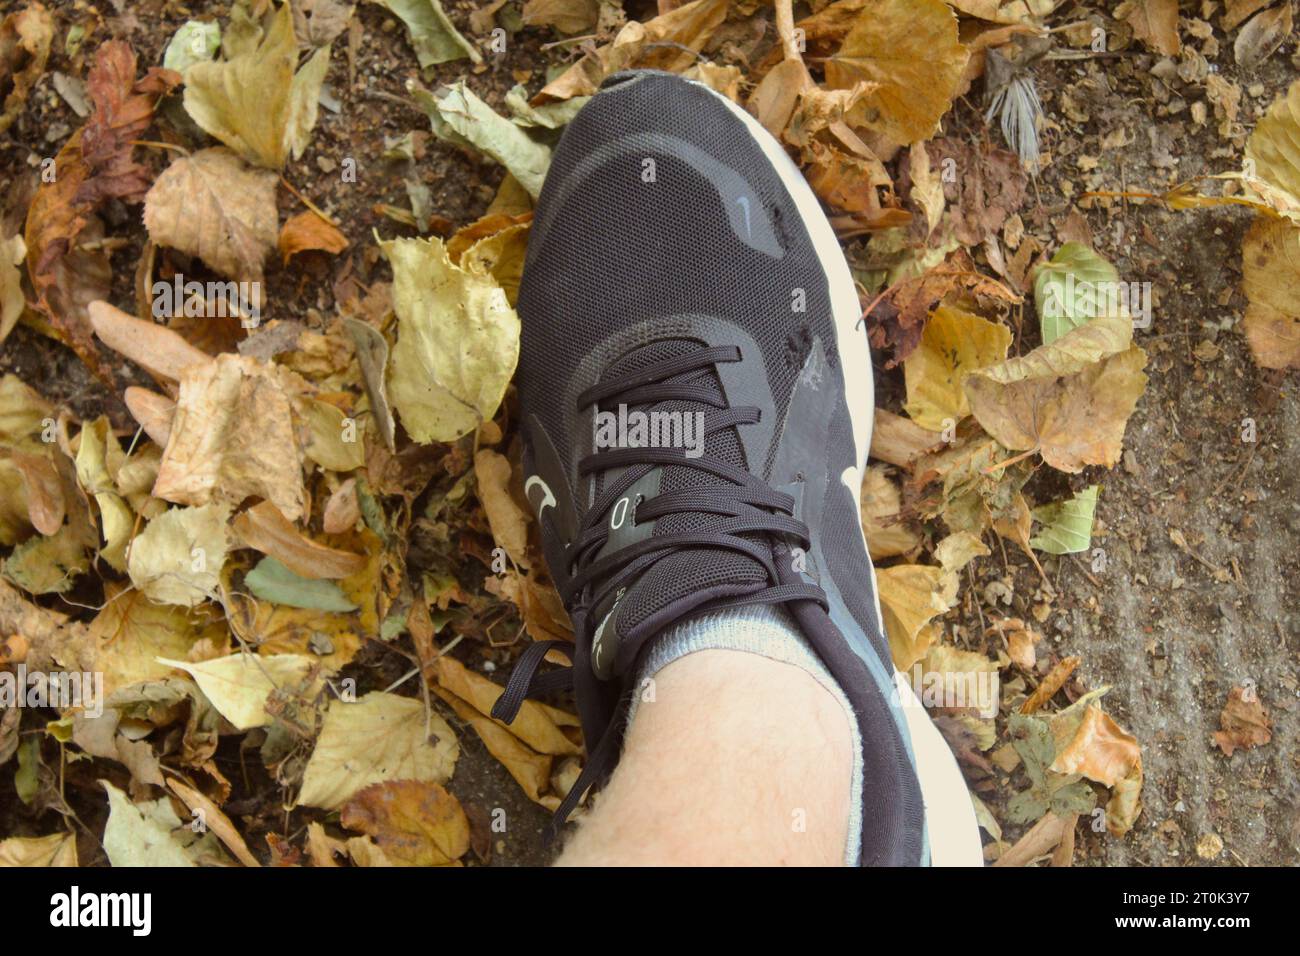 A photo of someone's shoe walking on Autumn leaves. Stock Photo